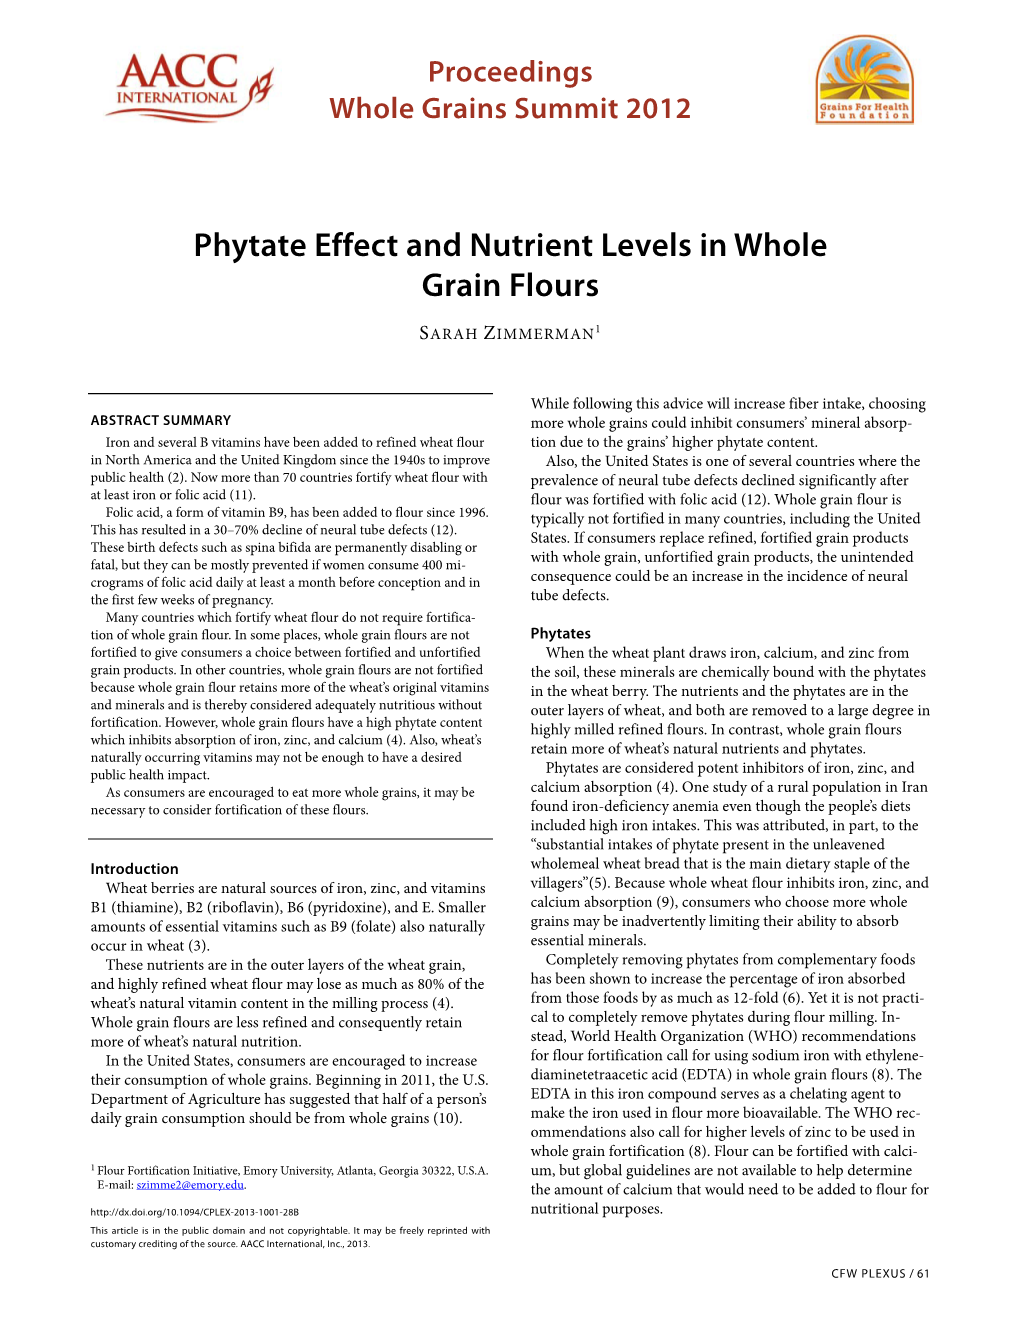 Phytate Effect and Nutrient Levels in Whole Grain Flours